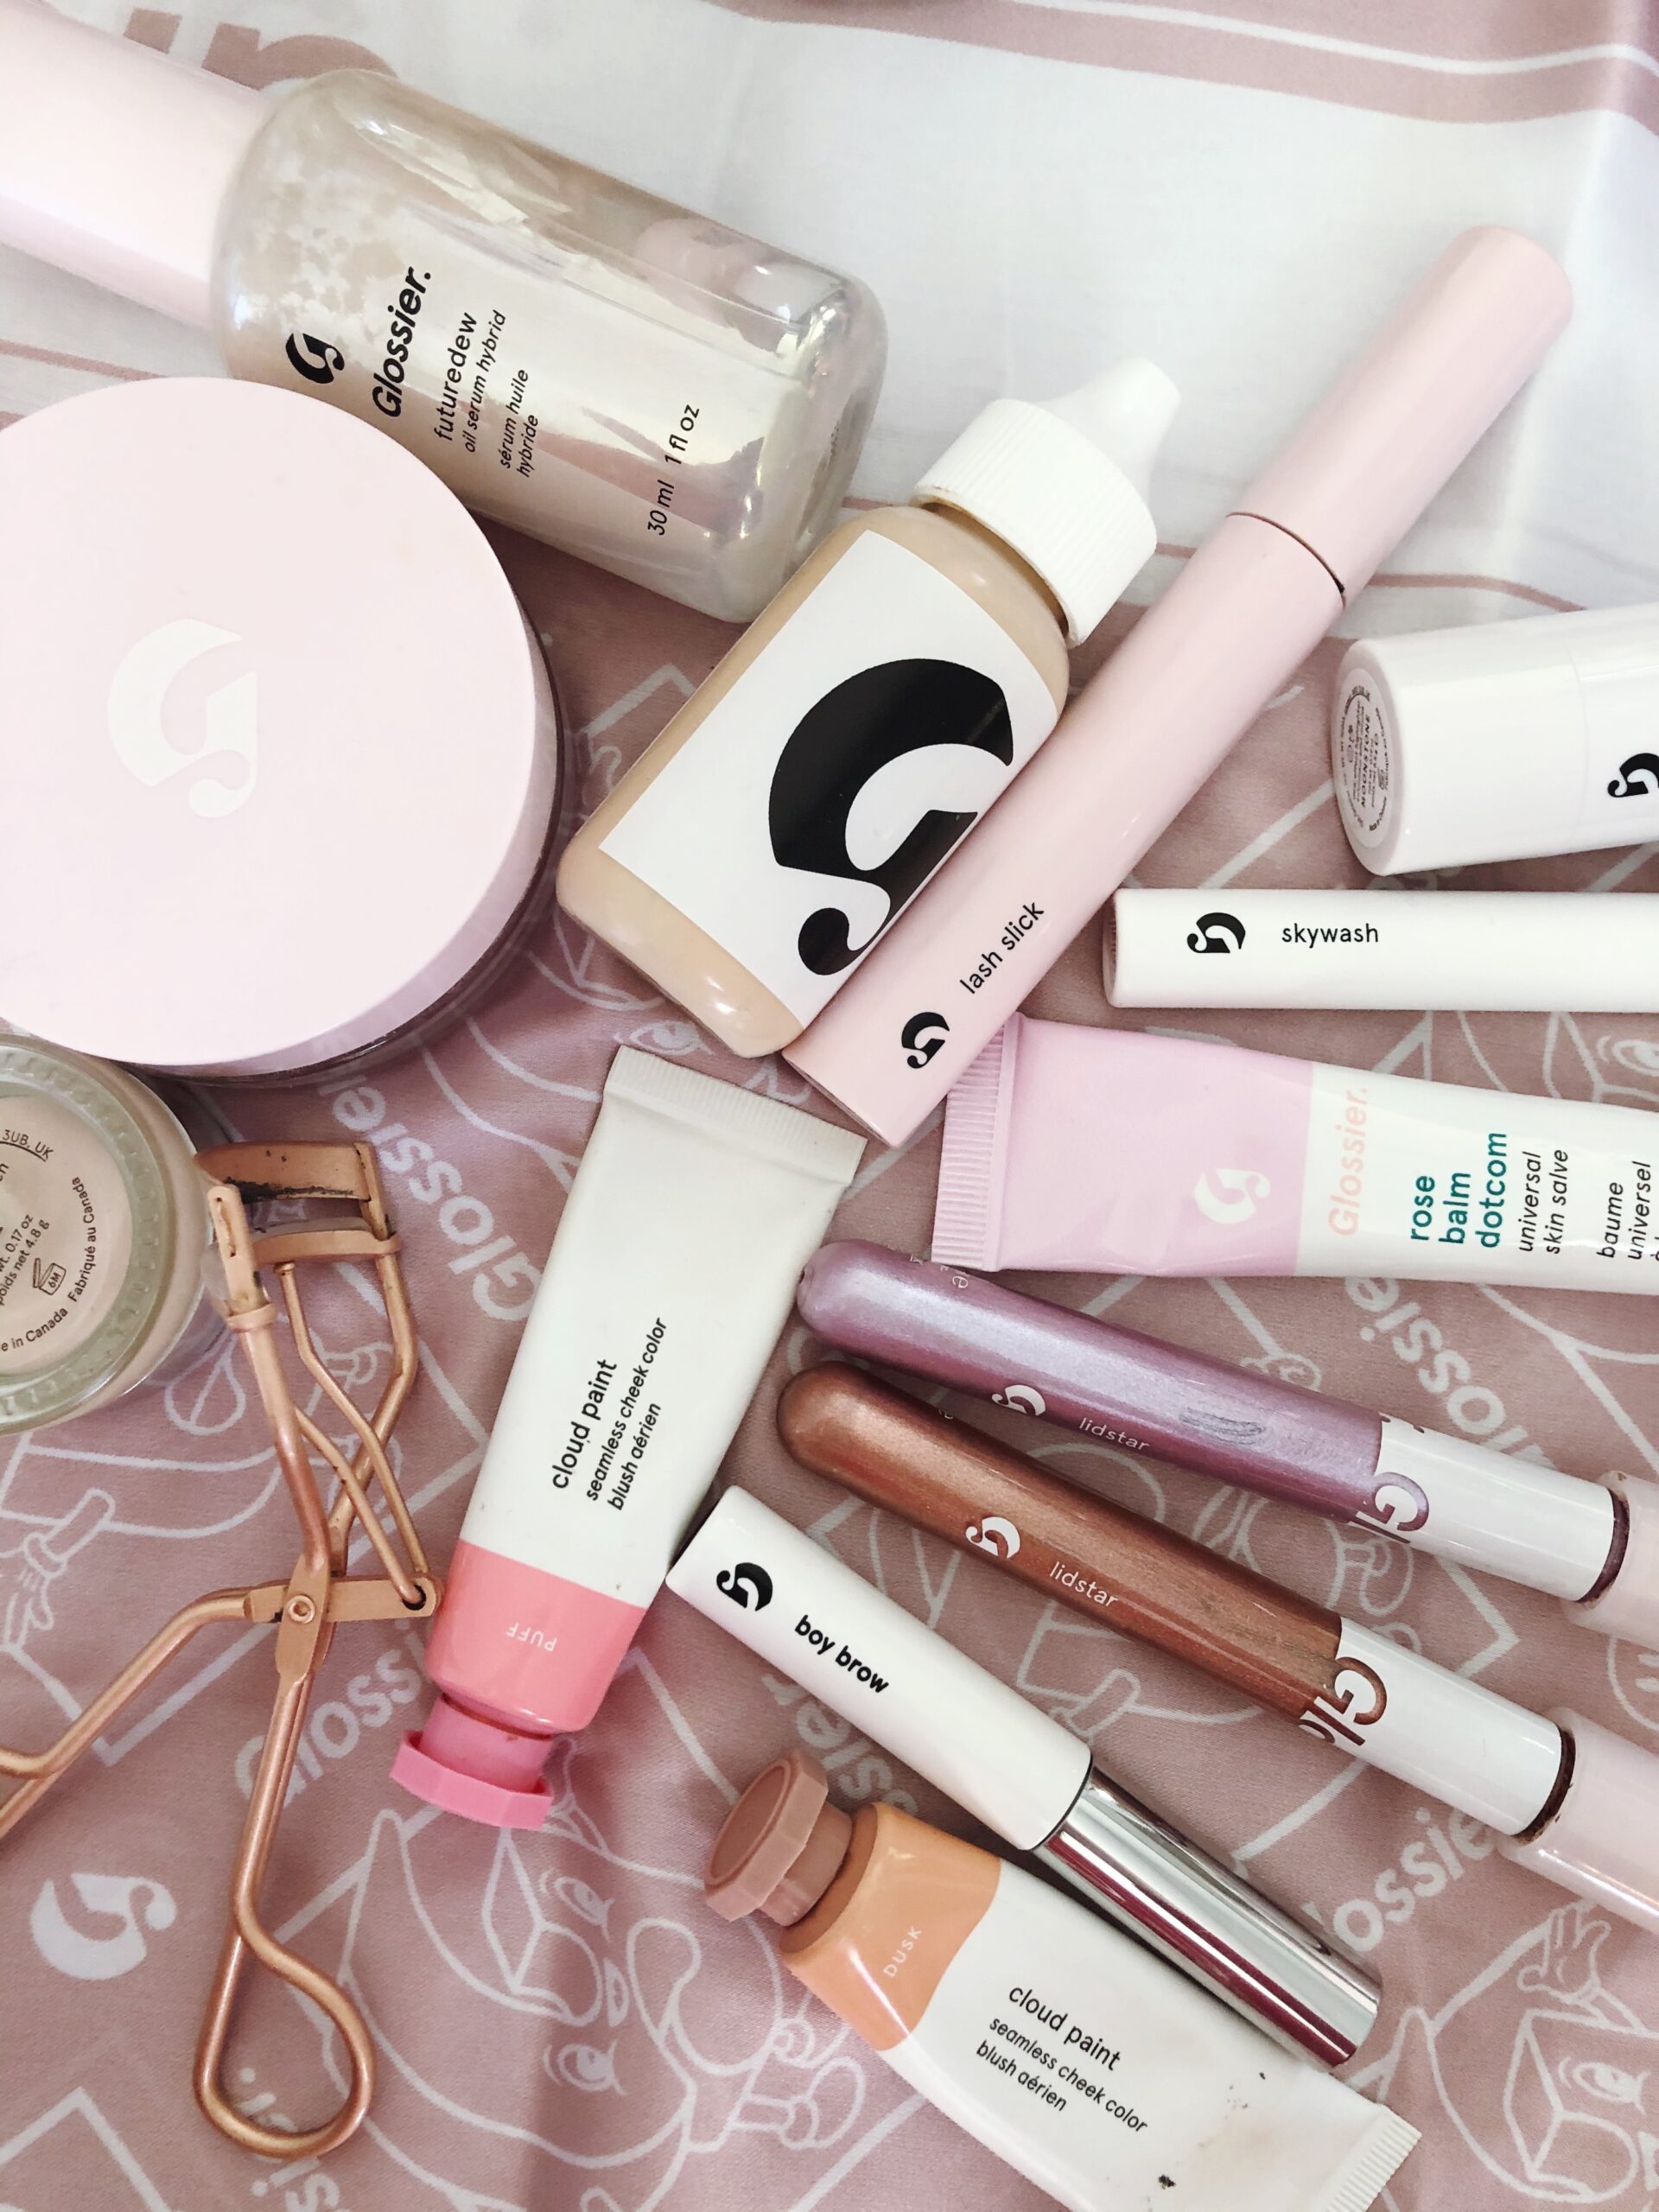 Best Glossier Products: Top 10 Essentials | The Beauty Minimalist